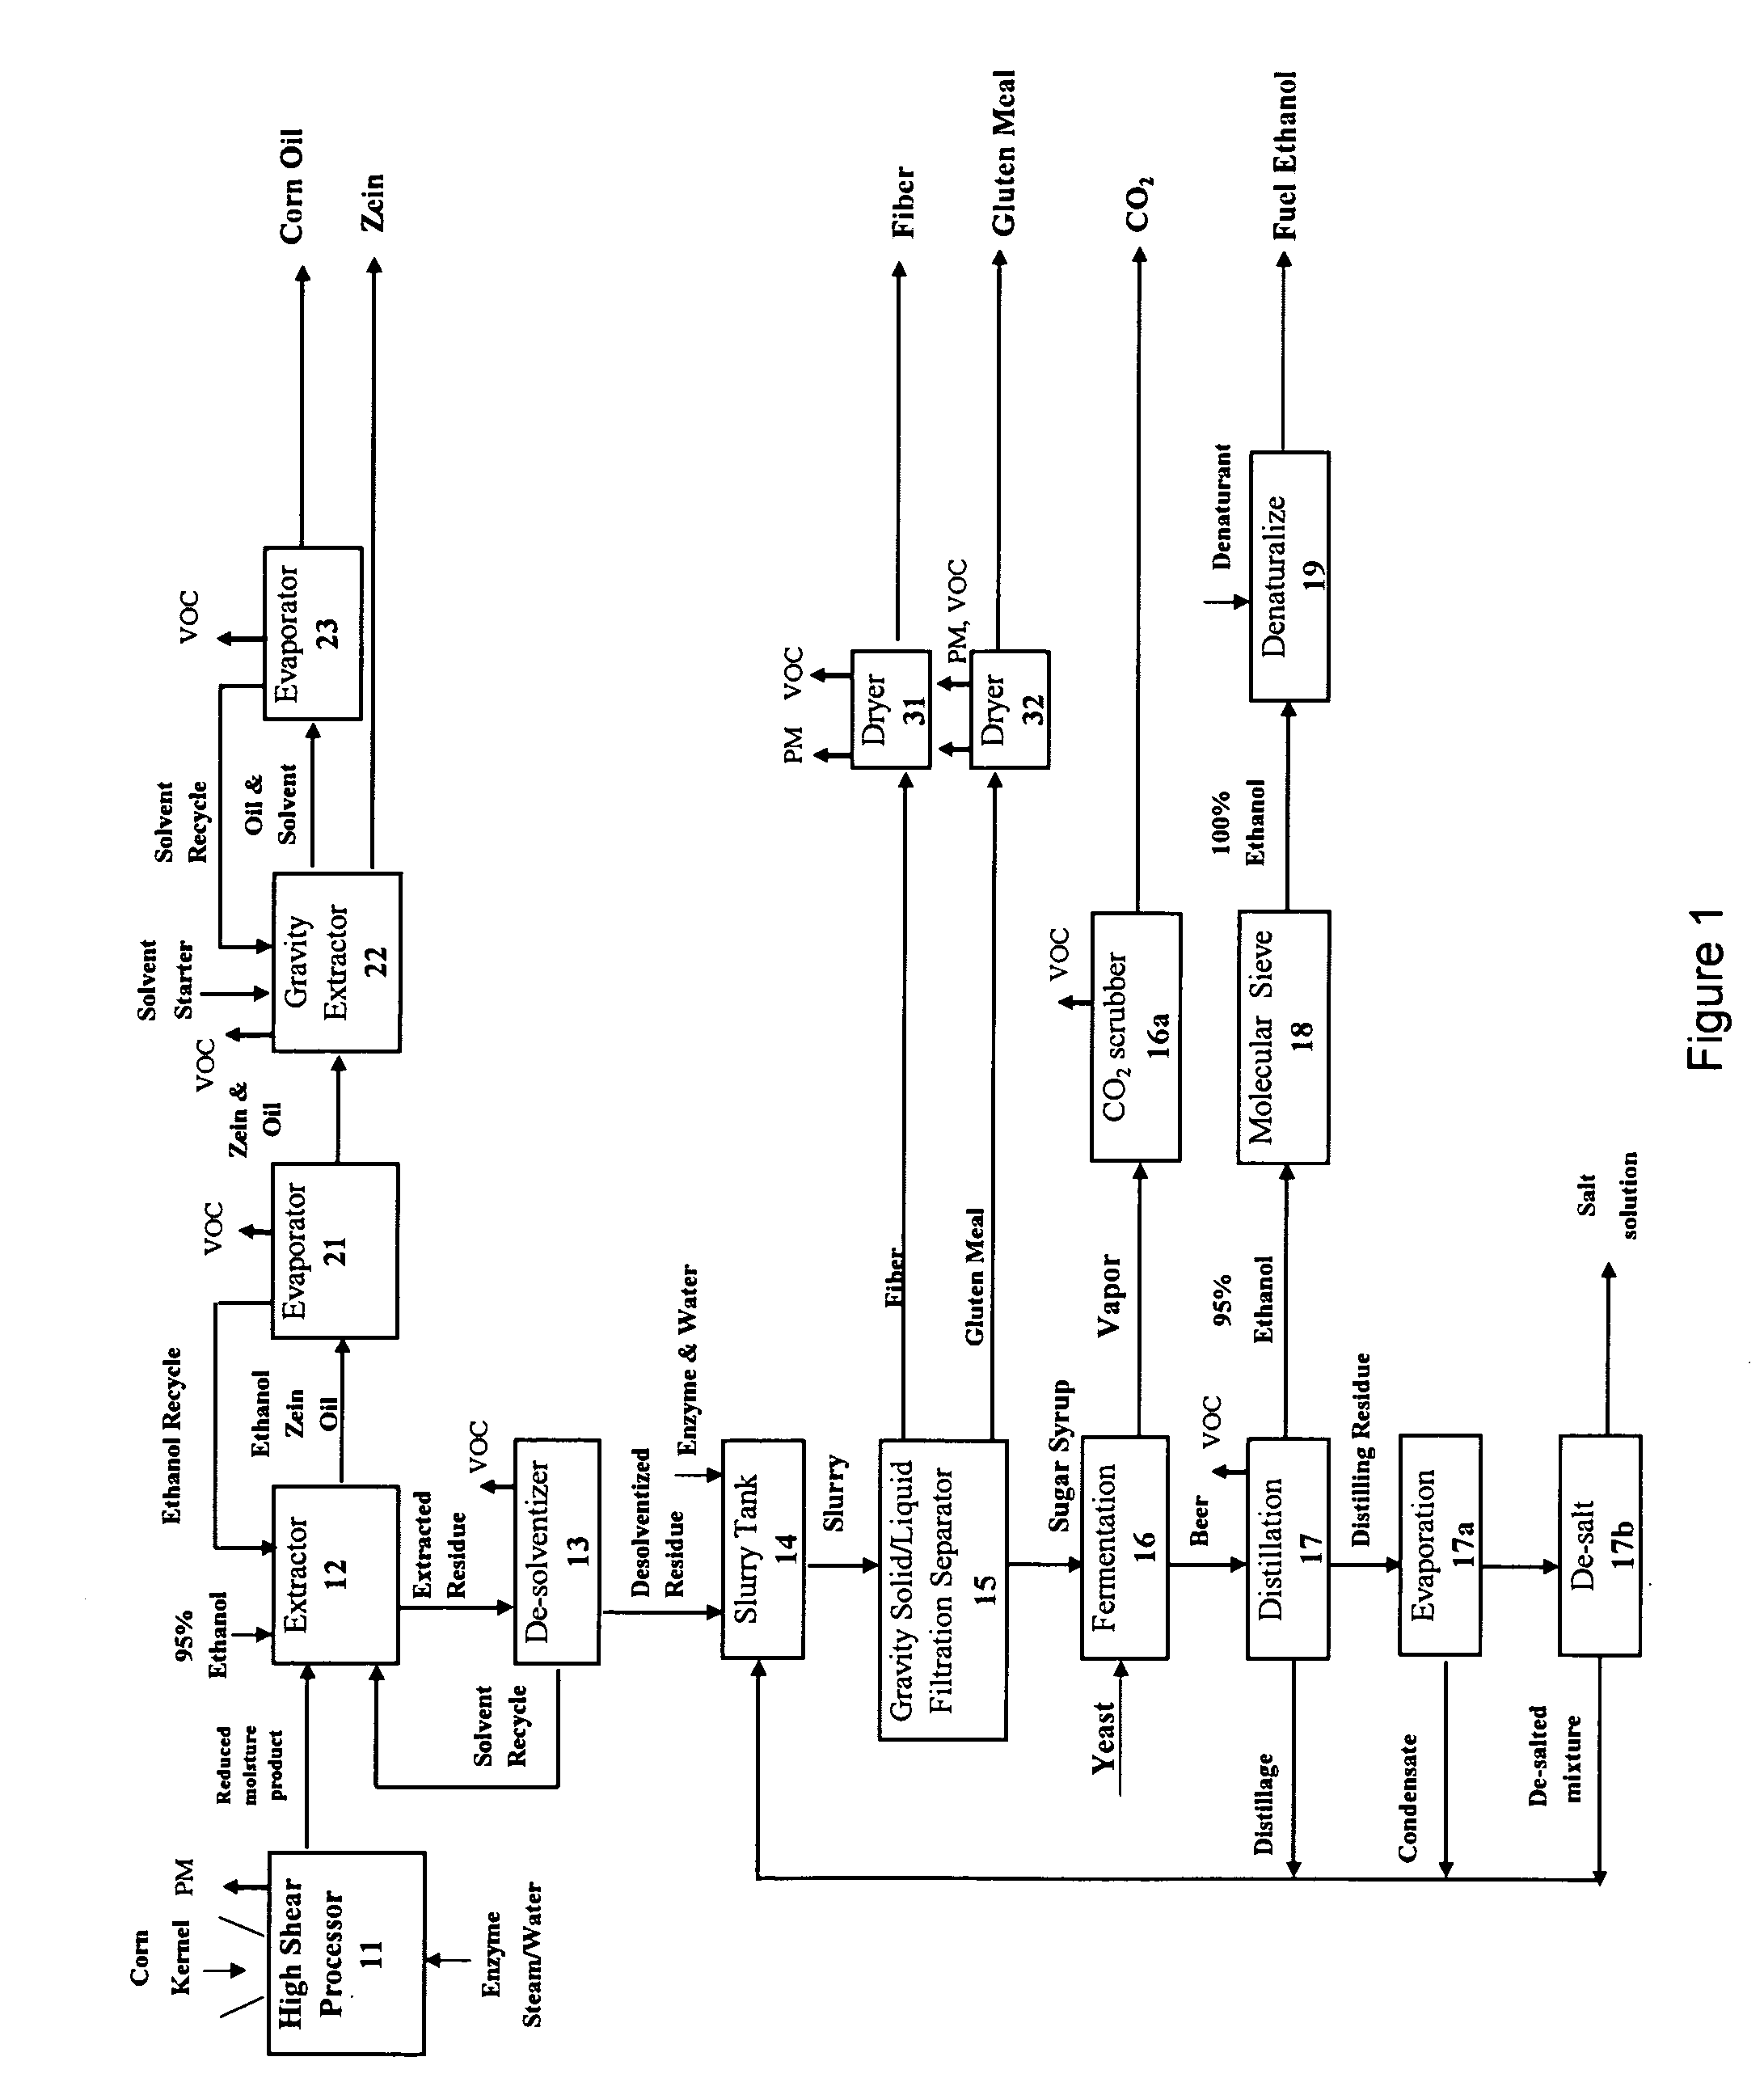 Starchy material processed to produce one or more products comprising starch, ethanol, sugar syrup, oil, protein, fiber, gluten meal, and mixtures thereof